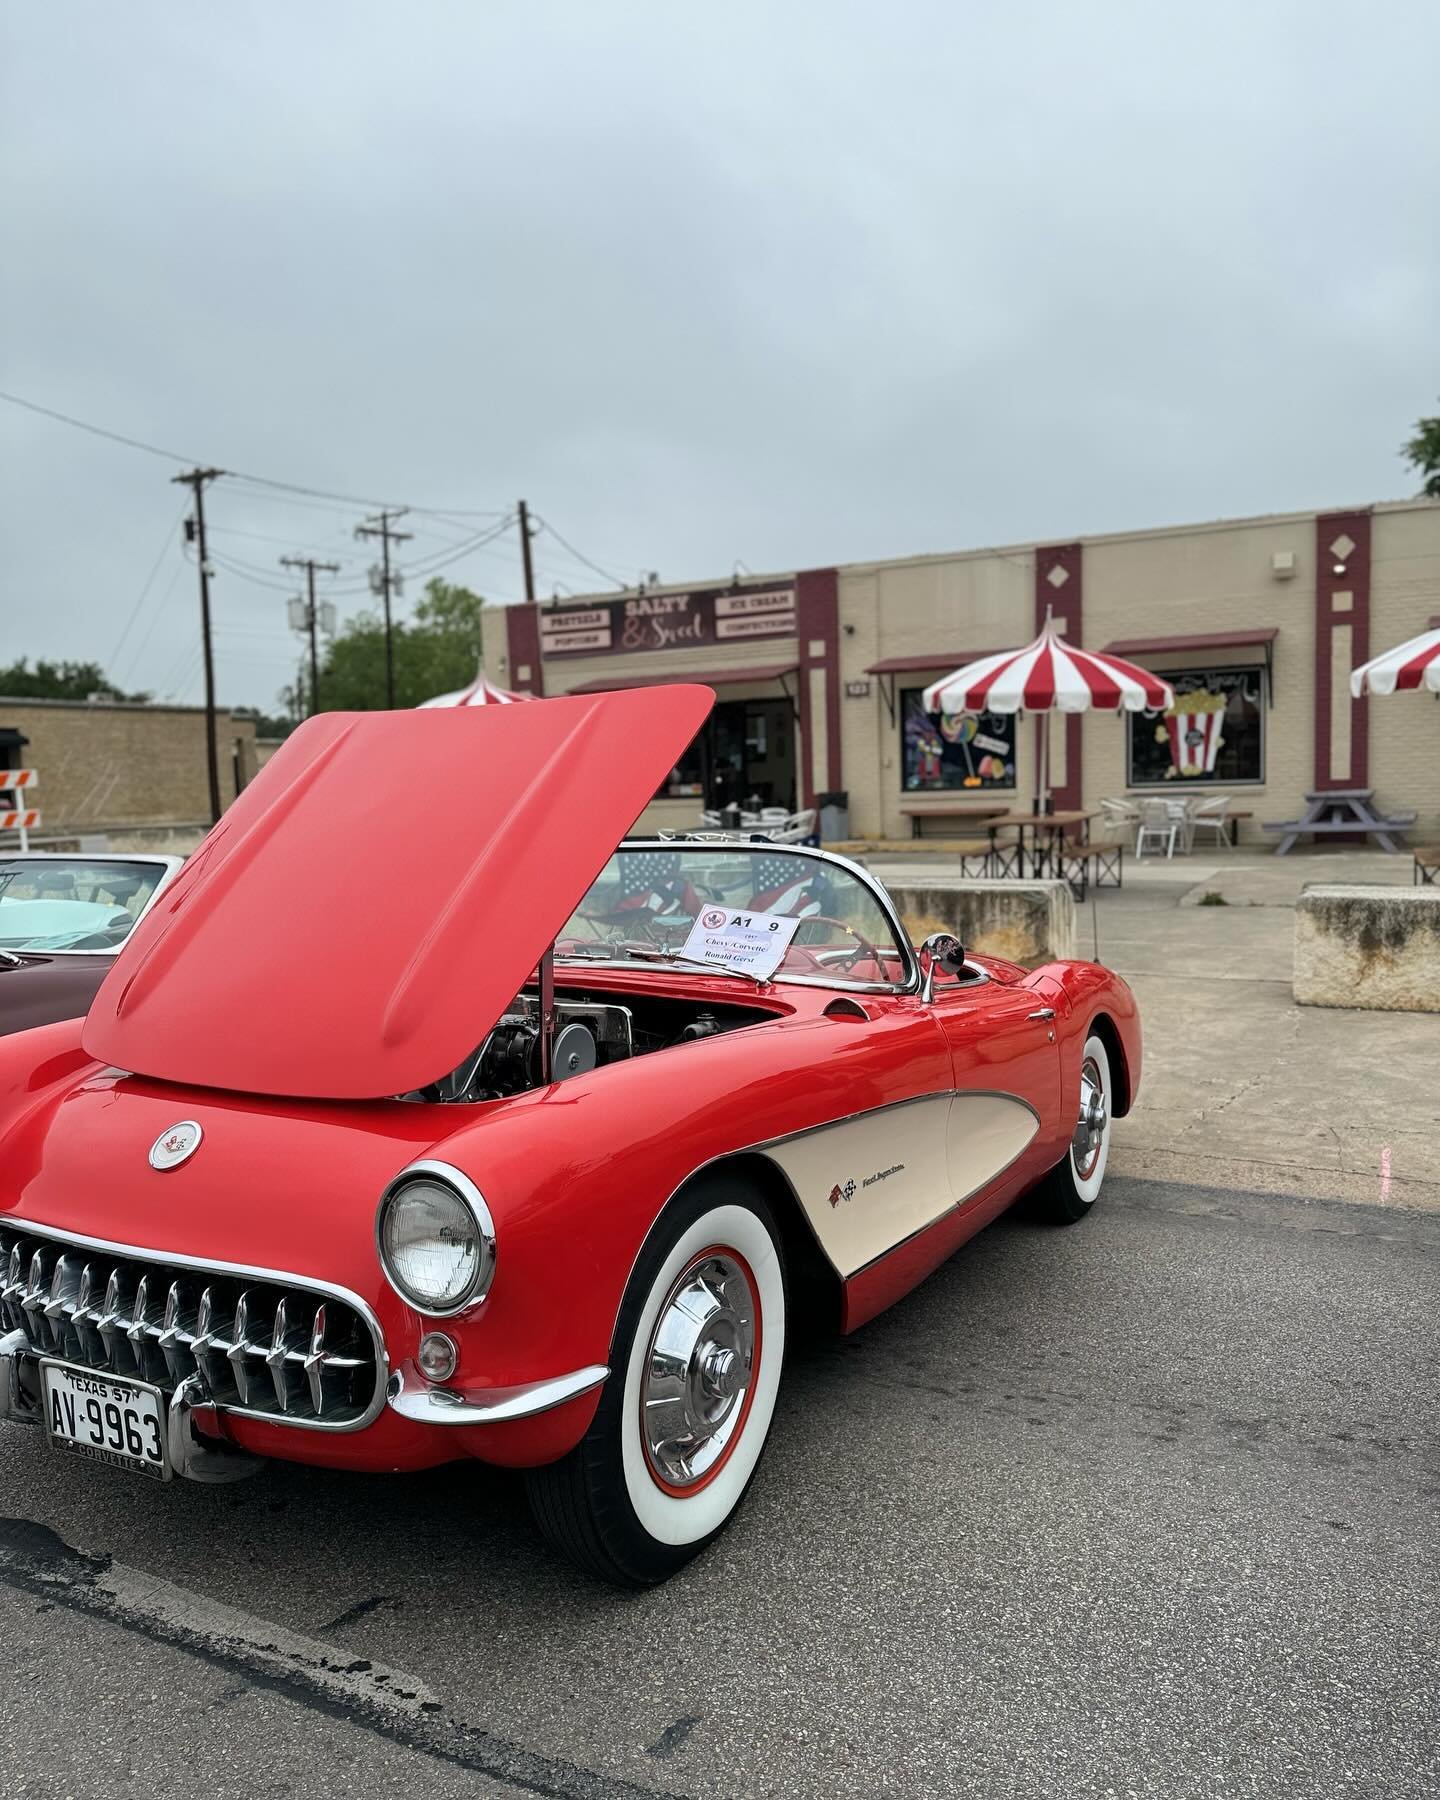 After looking at this hot car, get some ice cream to cool you down!!!🔥🔥🍦🍦 
#boerne #boernetexas #boernetx #saltyandsweet #icecream #corvette #corvetteshow